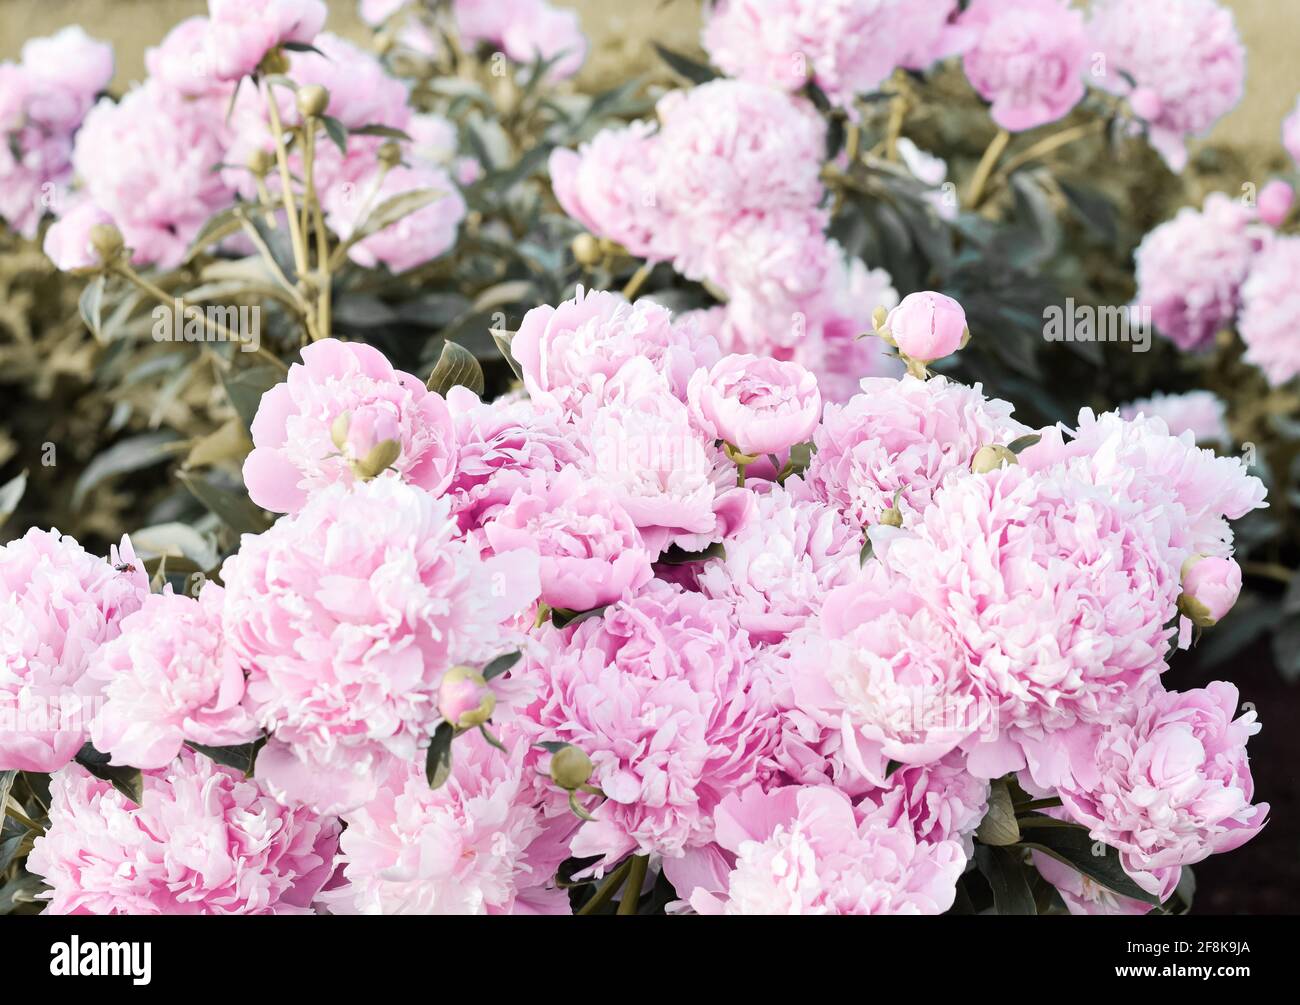 Common Garden Peony (Chinese Peony) (Paeonia lactiflora), 'Monsieur Jules Elie' shrub blooming in early summer with pink flowers Stock Photo